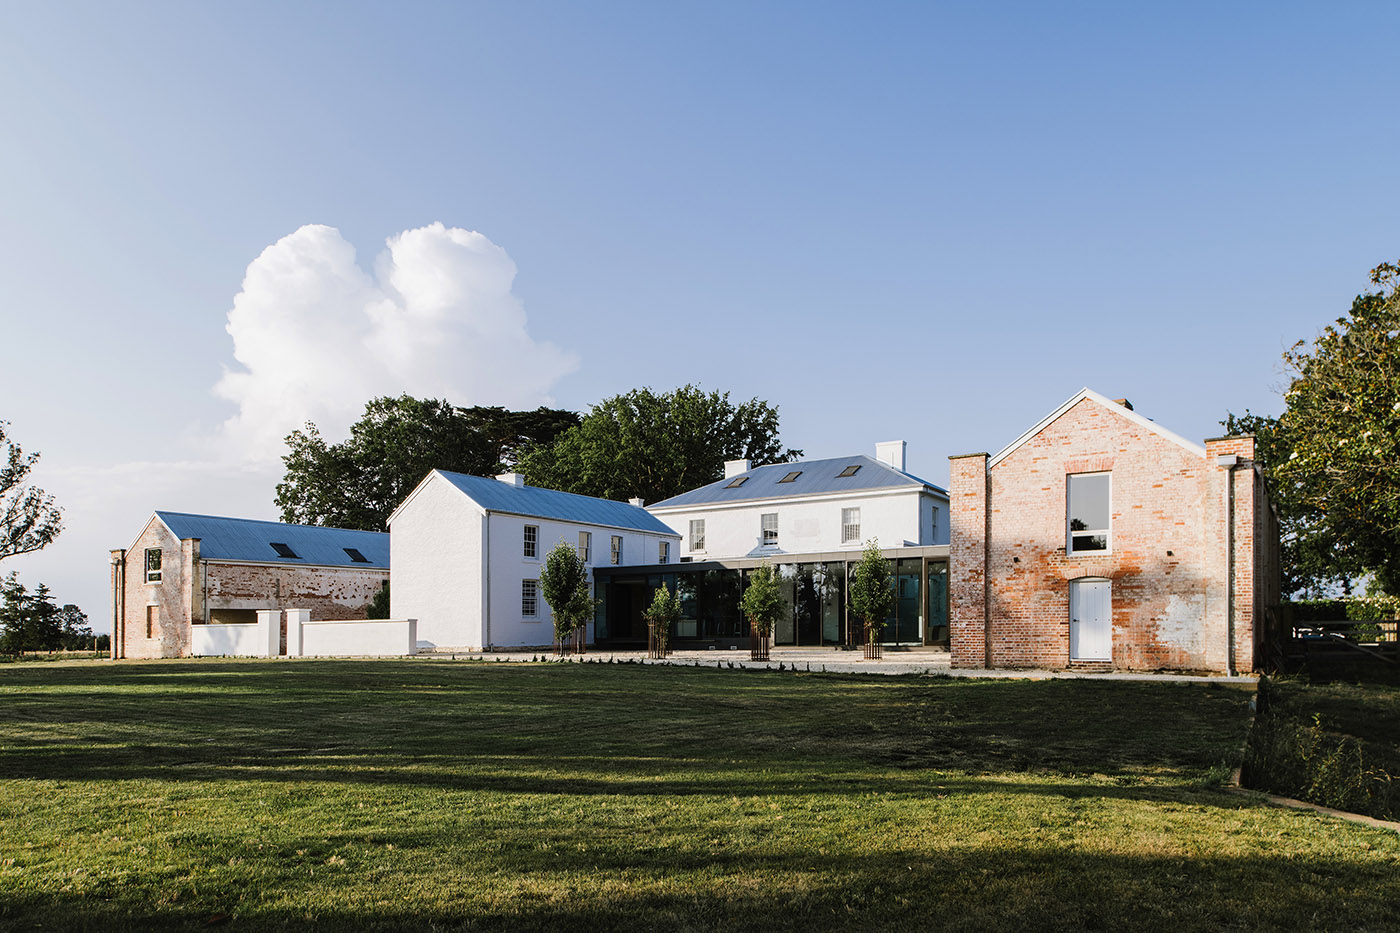 Symmons Plains Homestead: austere Georgian heritage grappling with a renovation shaped by modern trends